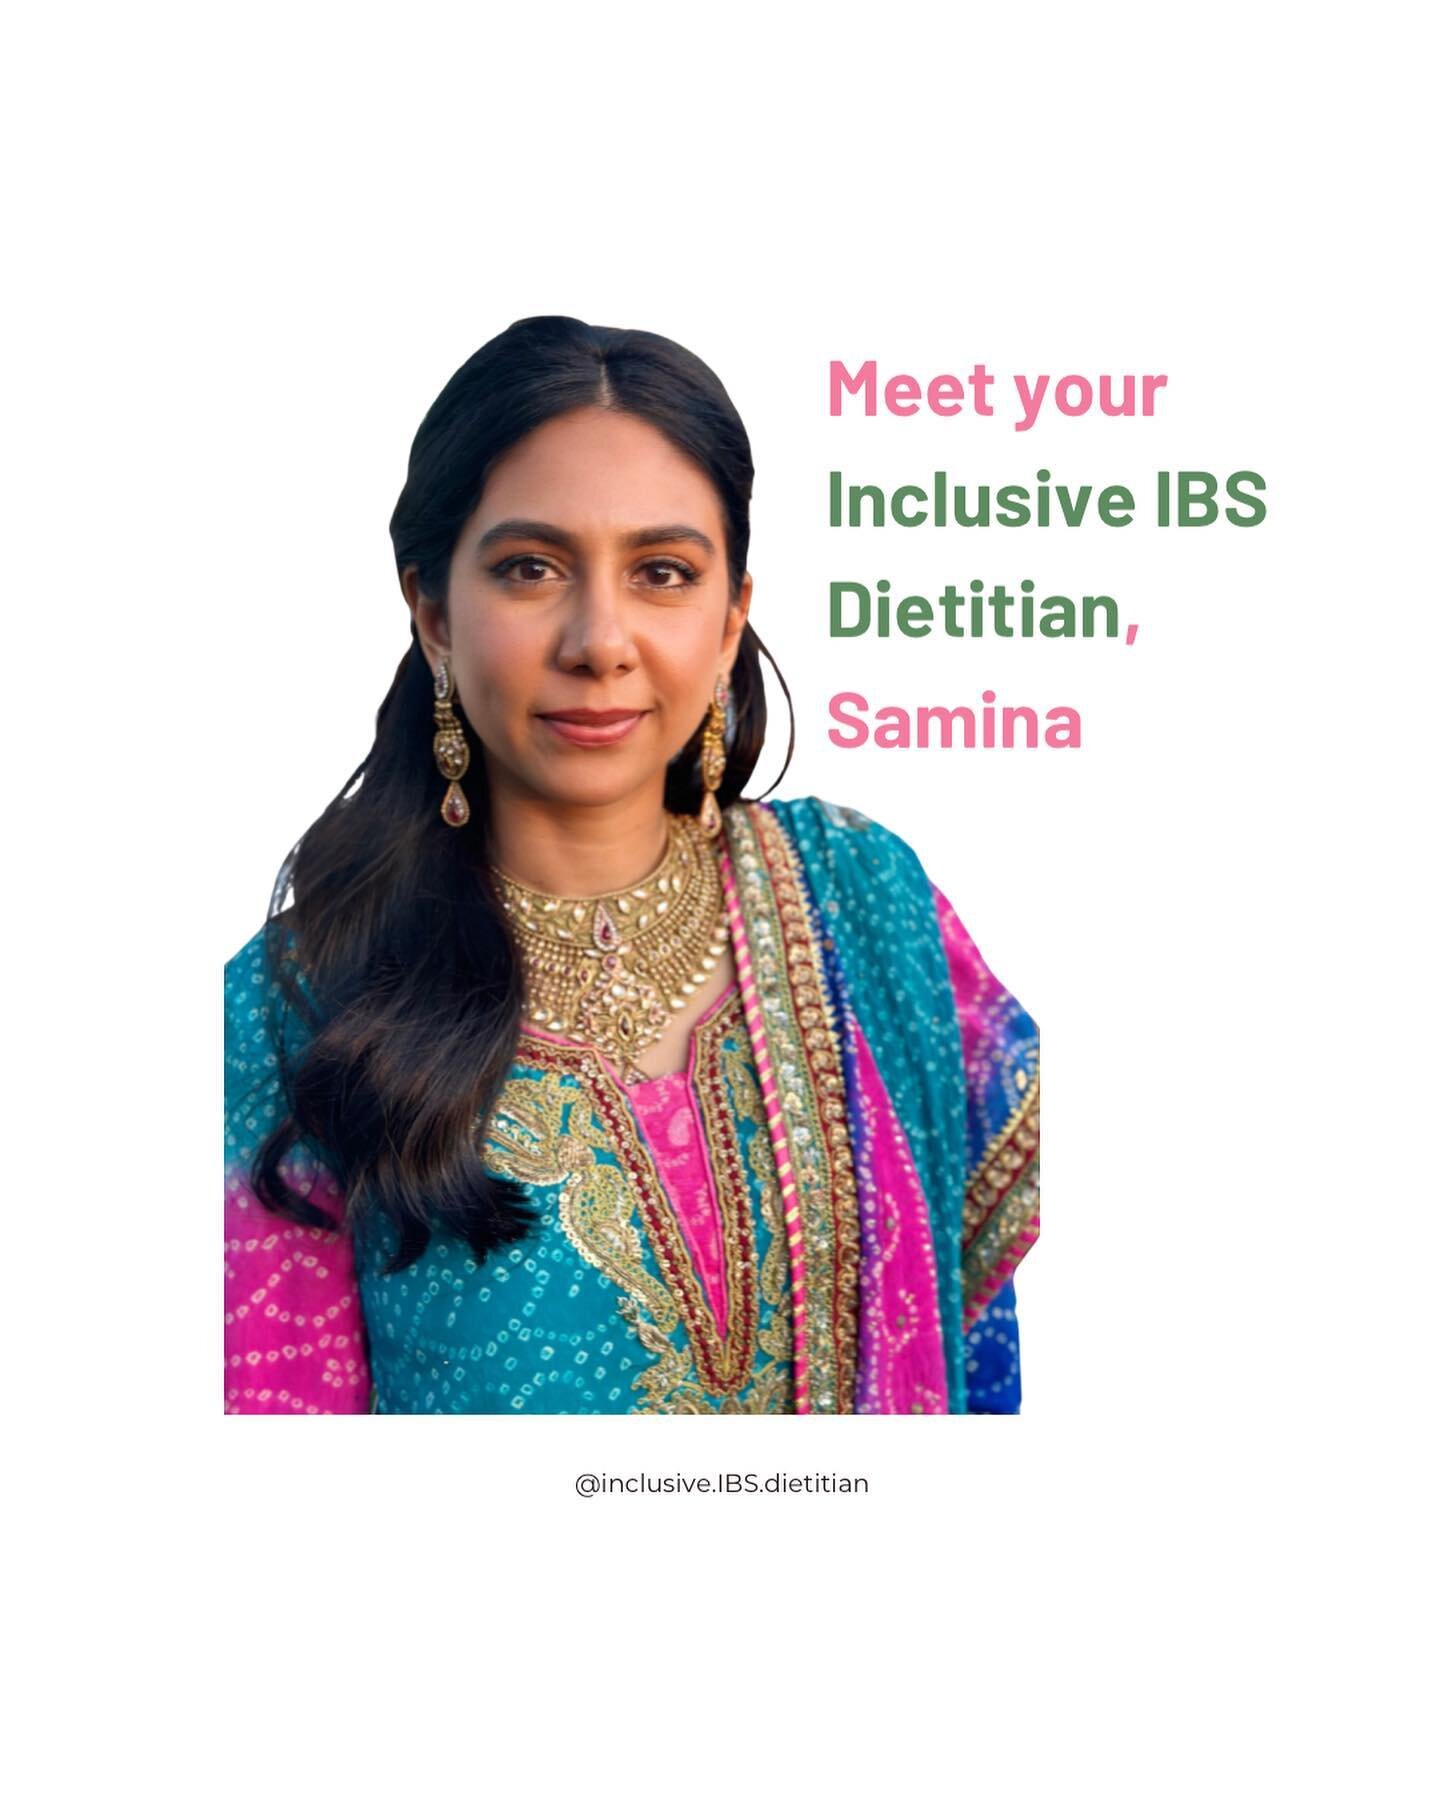 Learn 🤩3 fun facts about me 👇🏽

🌟 Fun fact #1: I recently changed my IG handle from antidiet.ibs.dietitian to @inclusive.ibs.dietitian 

Why did I make this change? 

The old name didn&rsquo;t represent my values as a weight-inclusive IBS dietiti